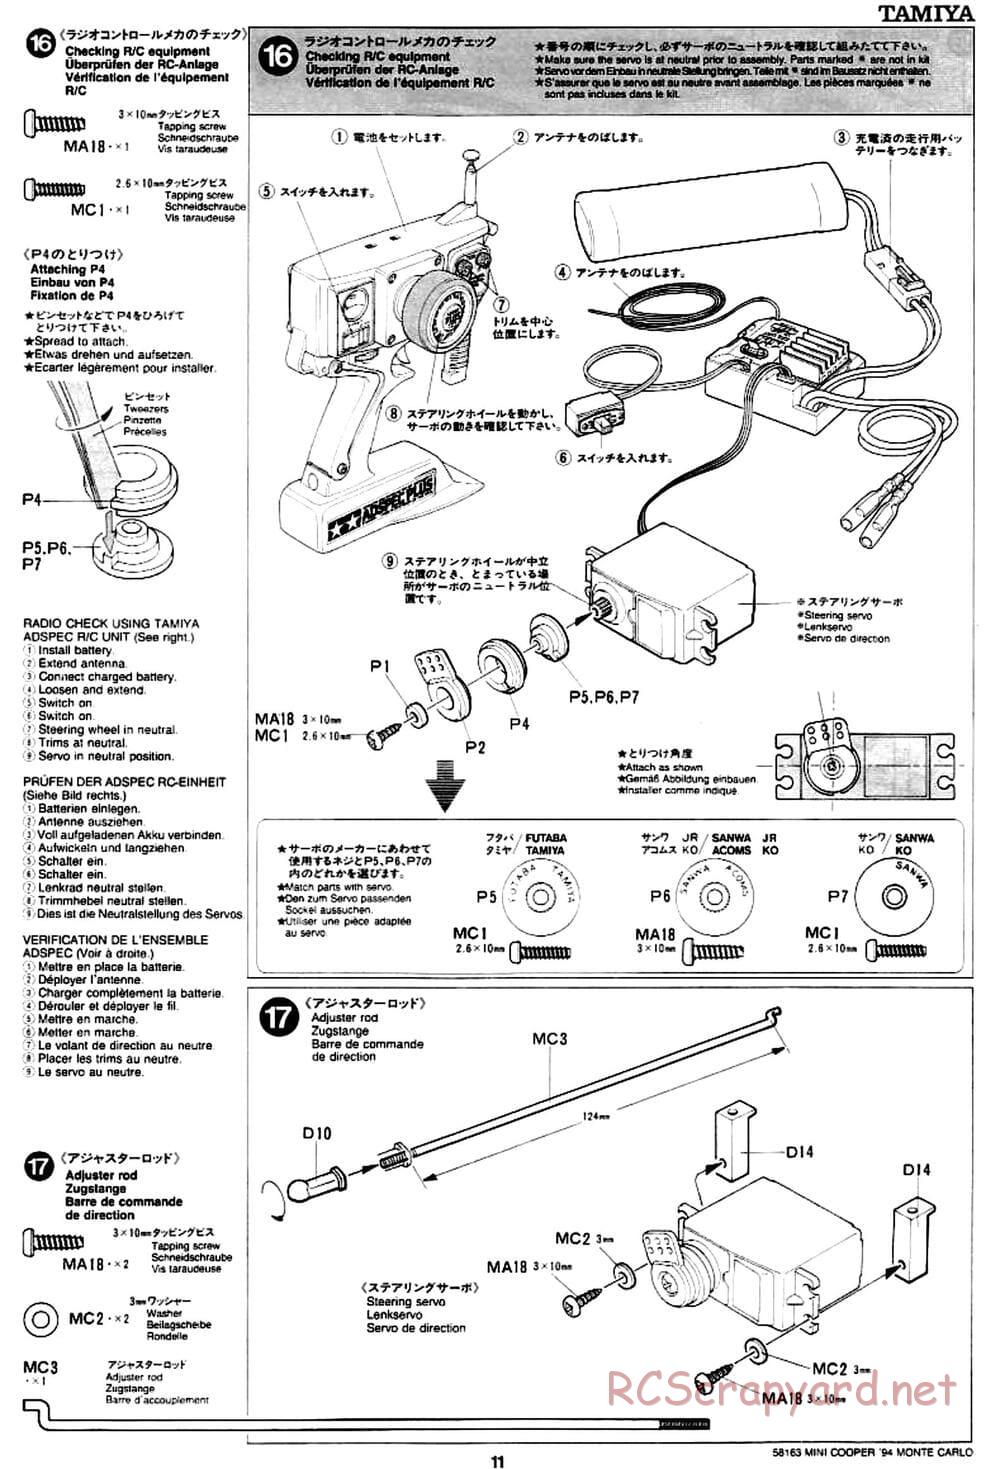 Tamiya - Rover Mini Cooper 94 Monte-Carlo - M01 Chassis - Manual - Page 11